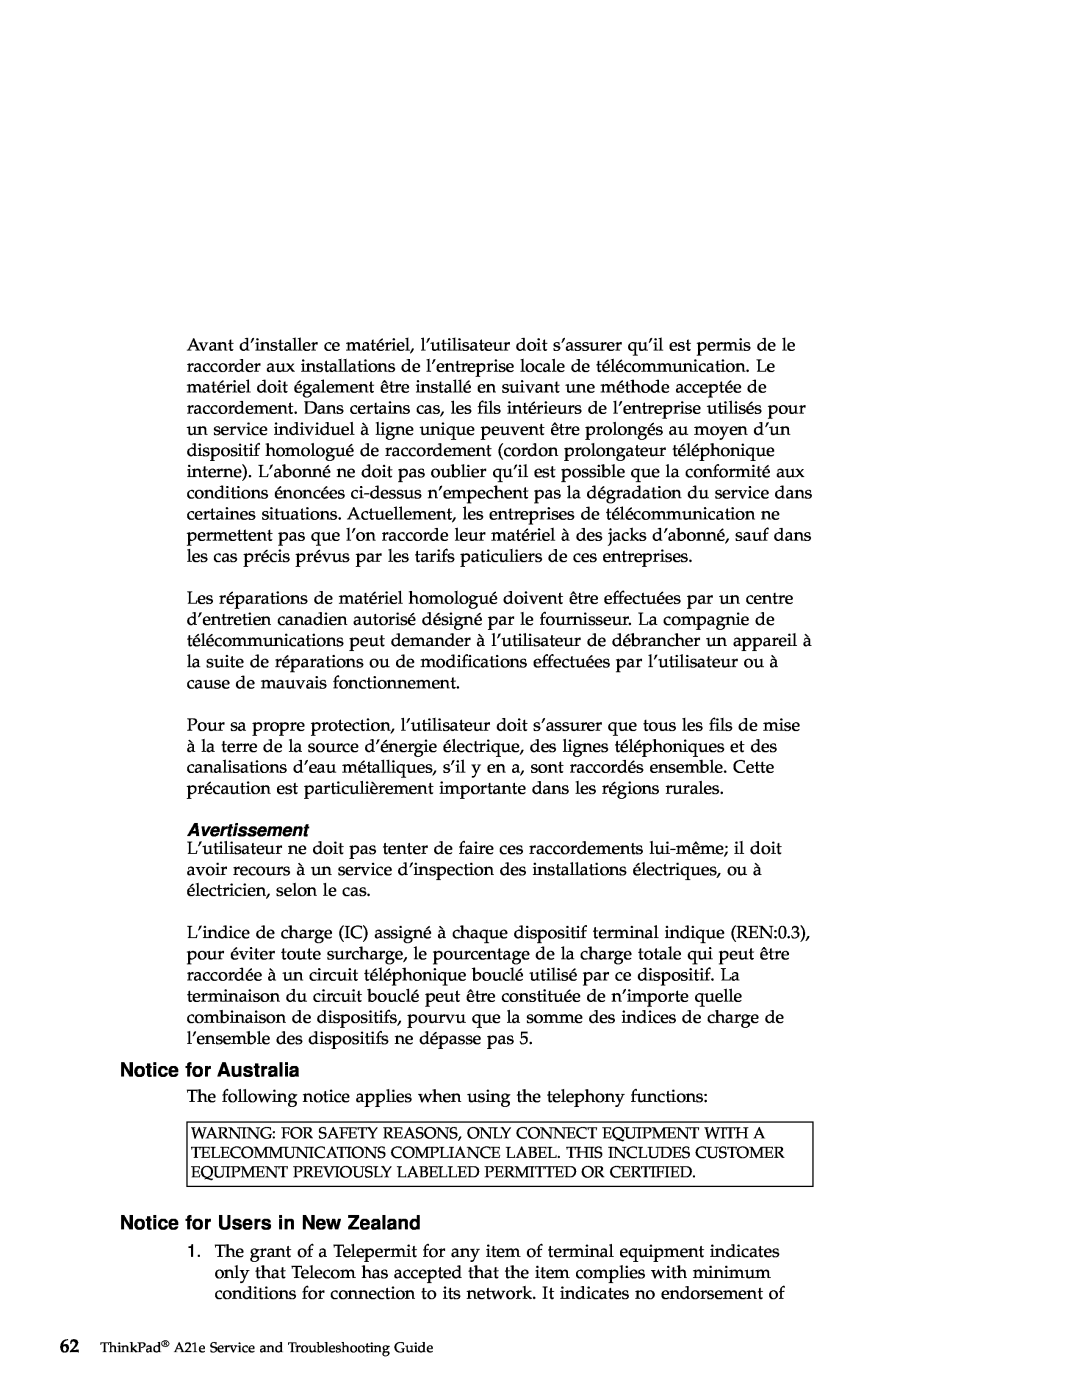 IBM A21e manual Notice for Australia, Notice for Users in New Zealand, Avertissement 